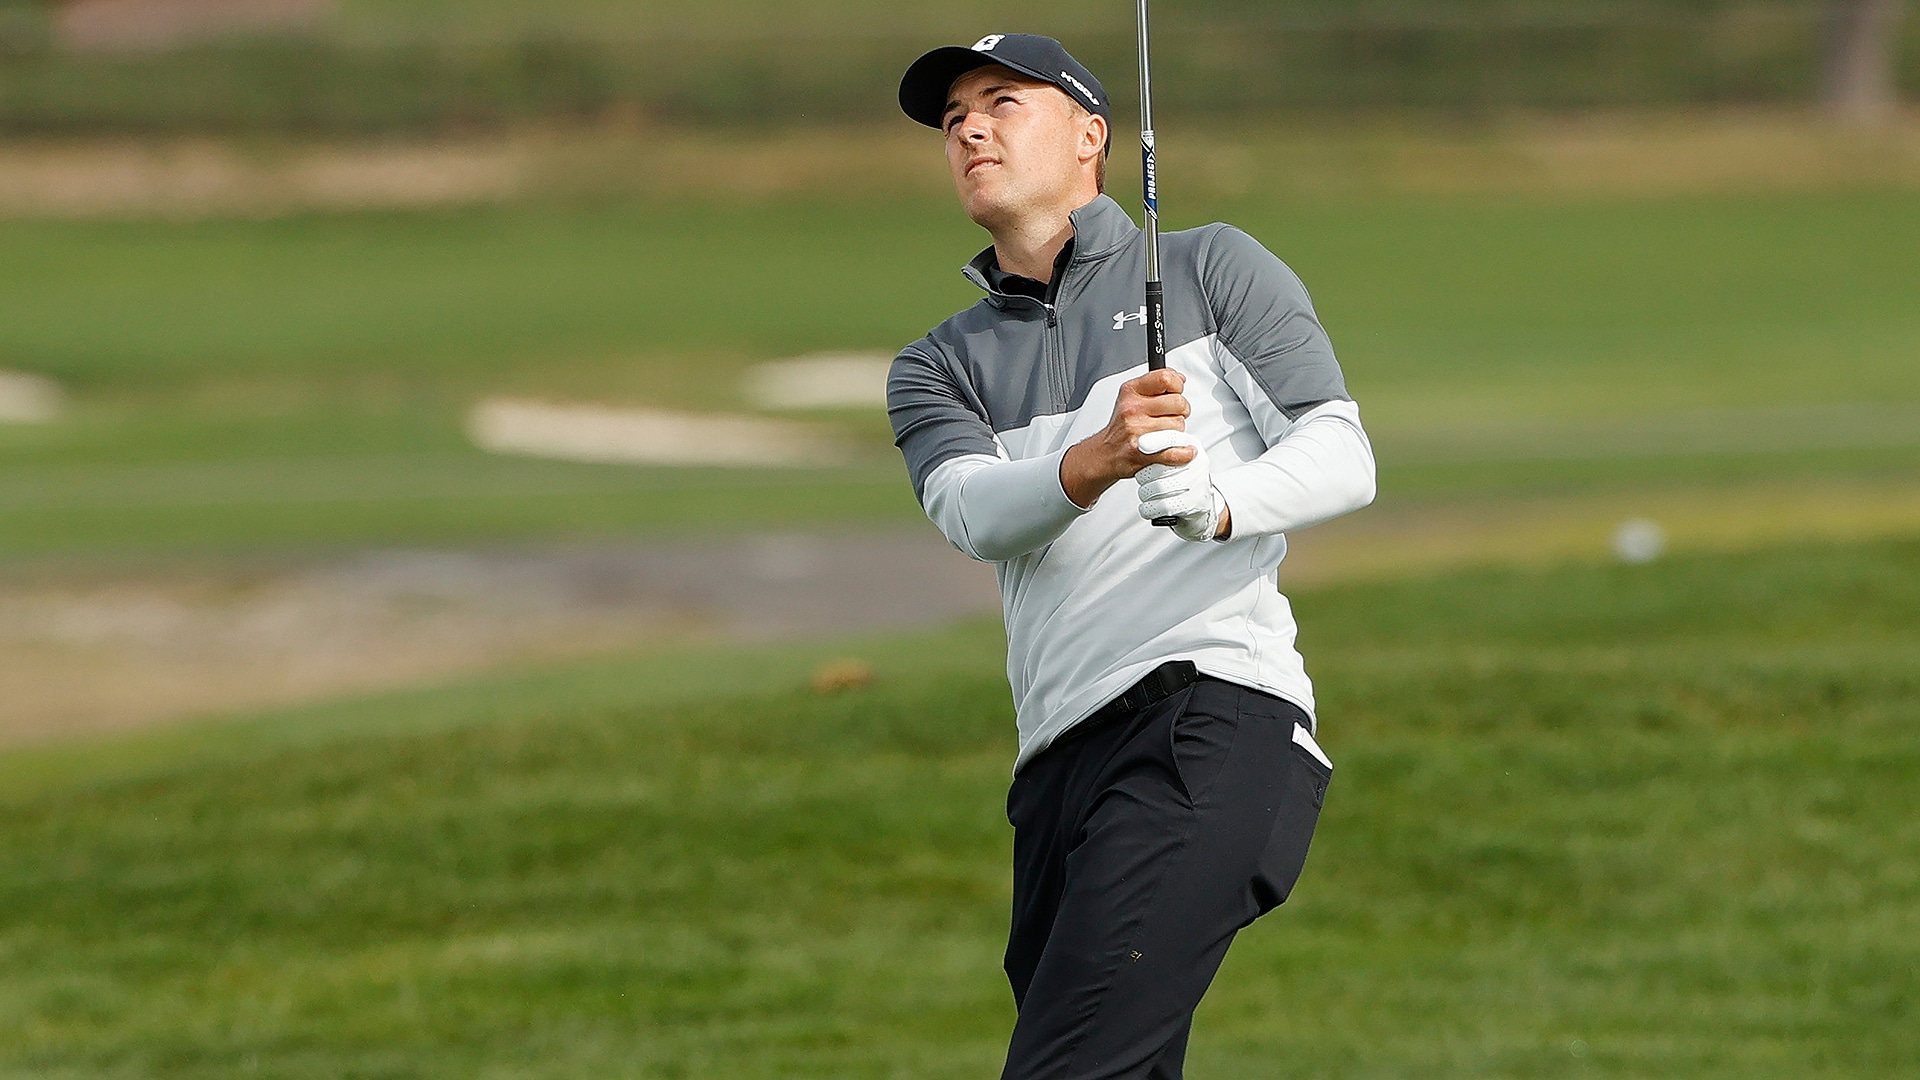 Jordan Spieth holes out for eagle, shoots 65 to open AT&T Pebble Beach Pro-Am